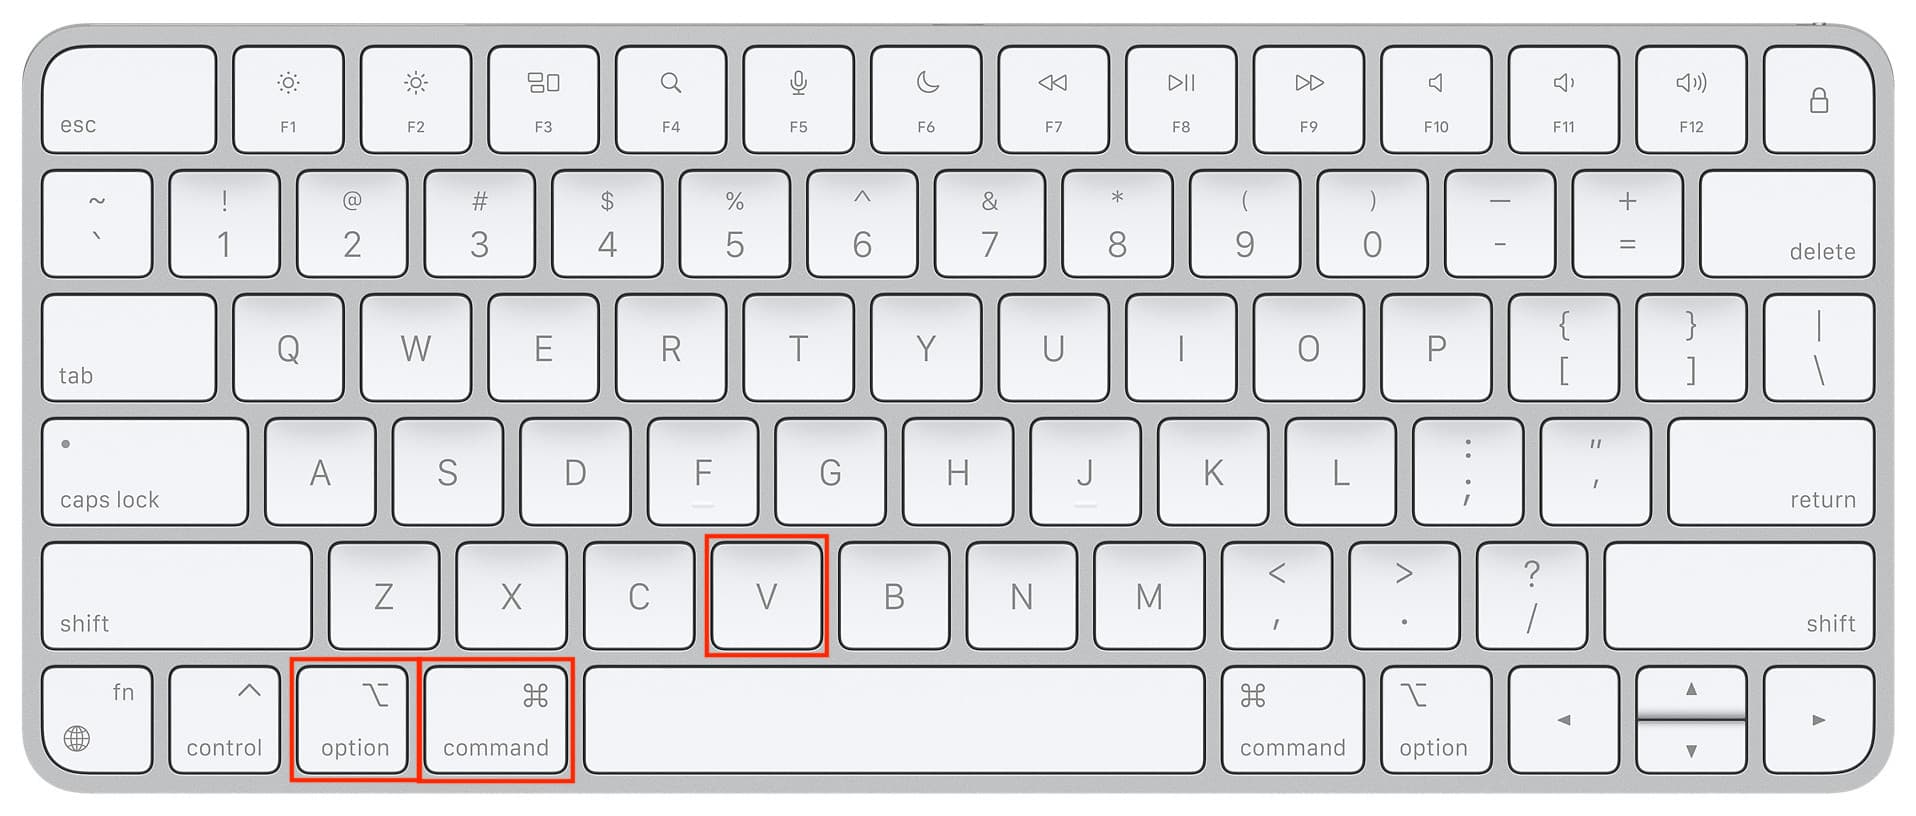 Command Option V keys on Mac keyboard to perform cut and paste action